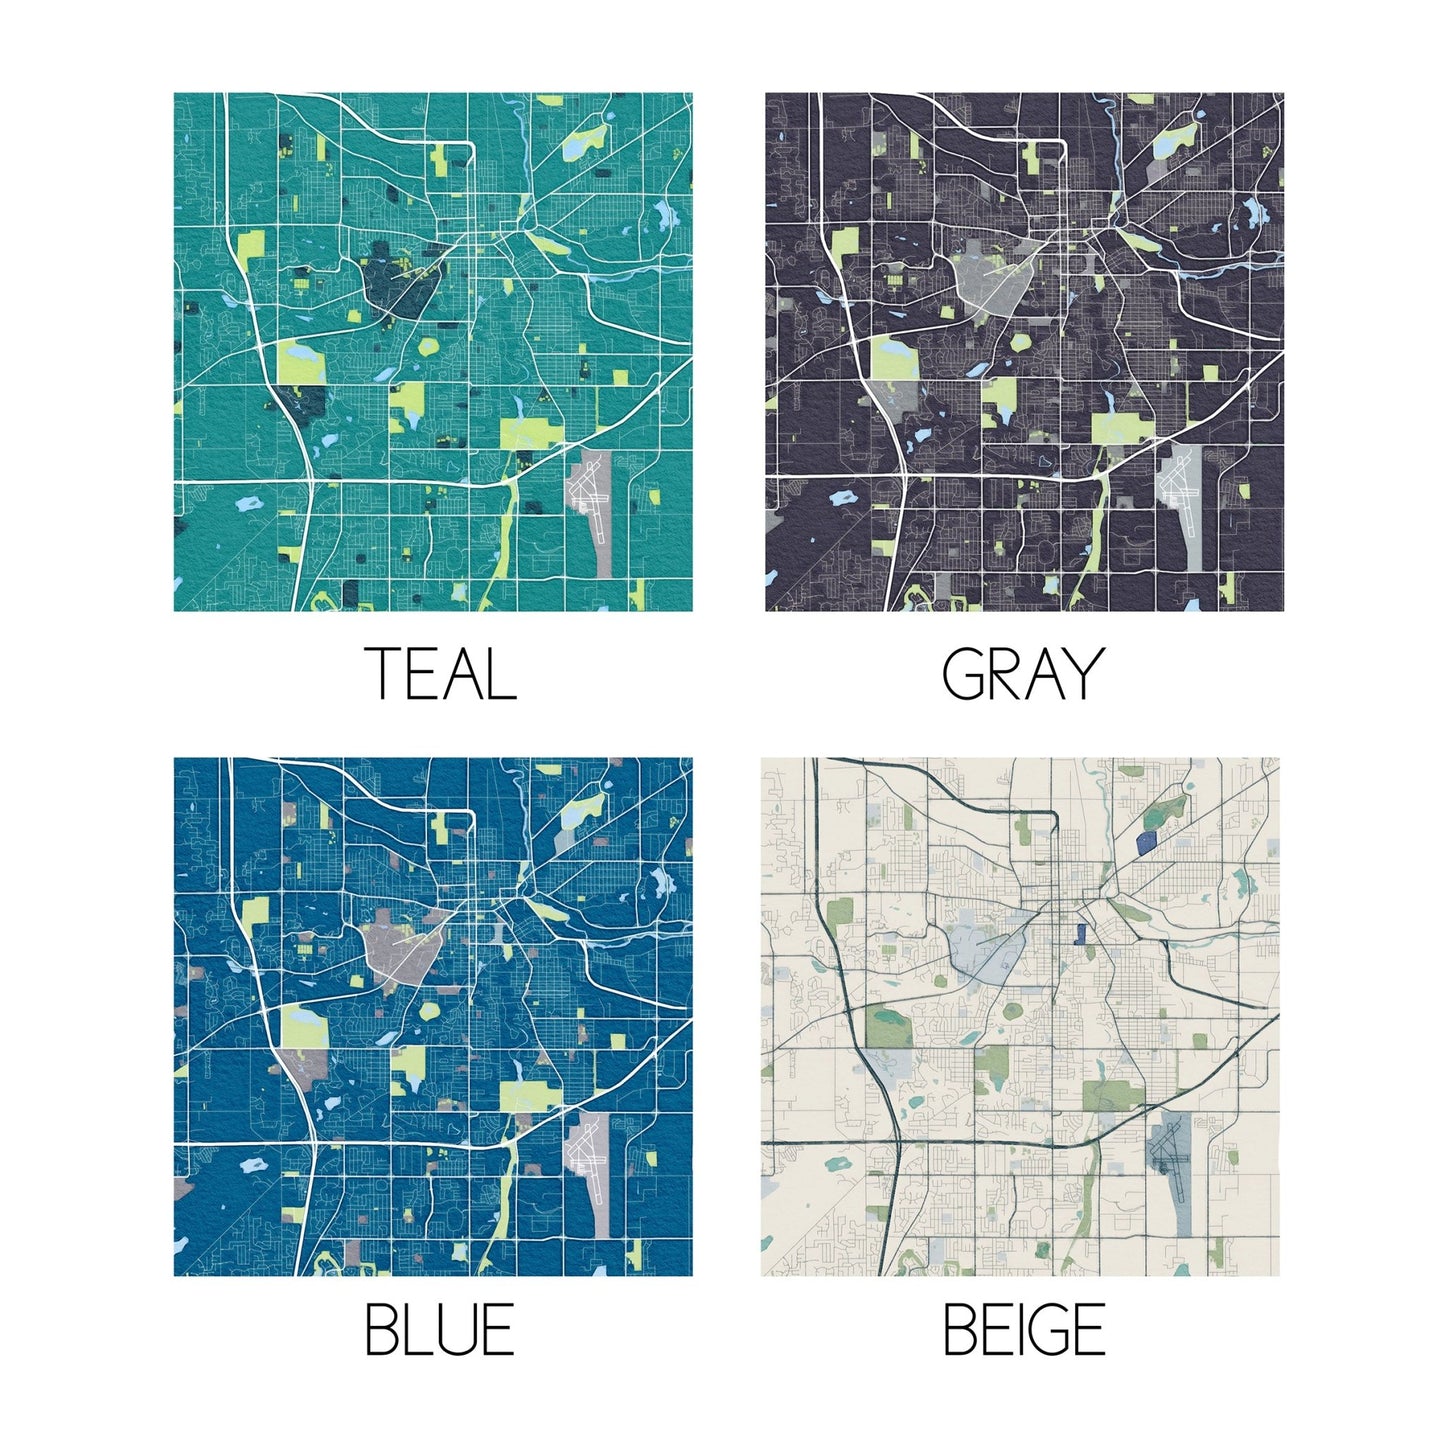 Examples of all four colors available for city maps: teal, gray, blue, and beige